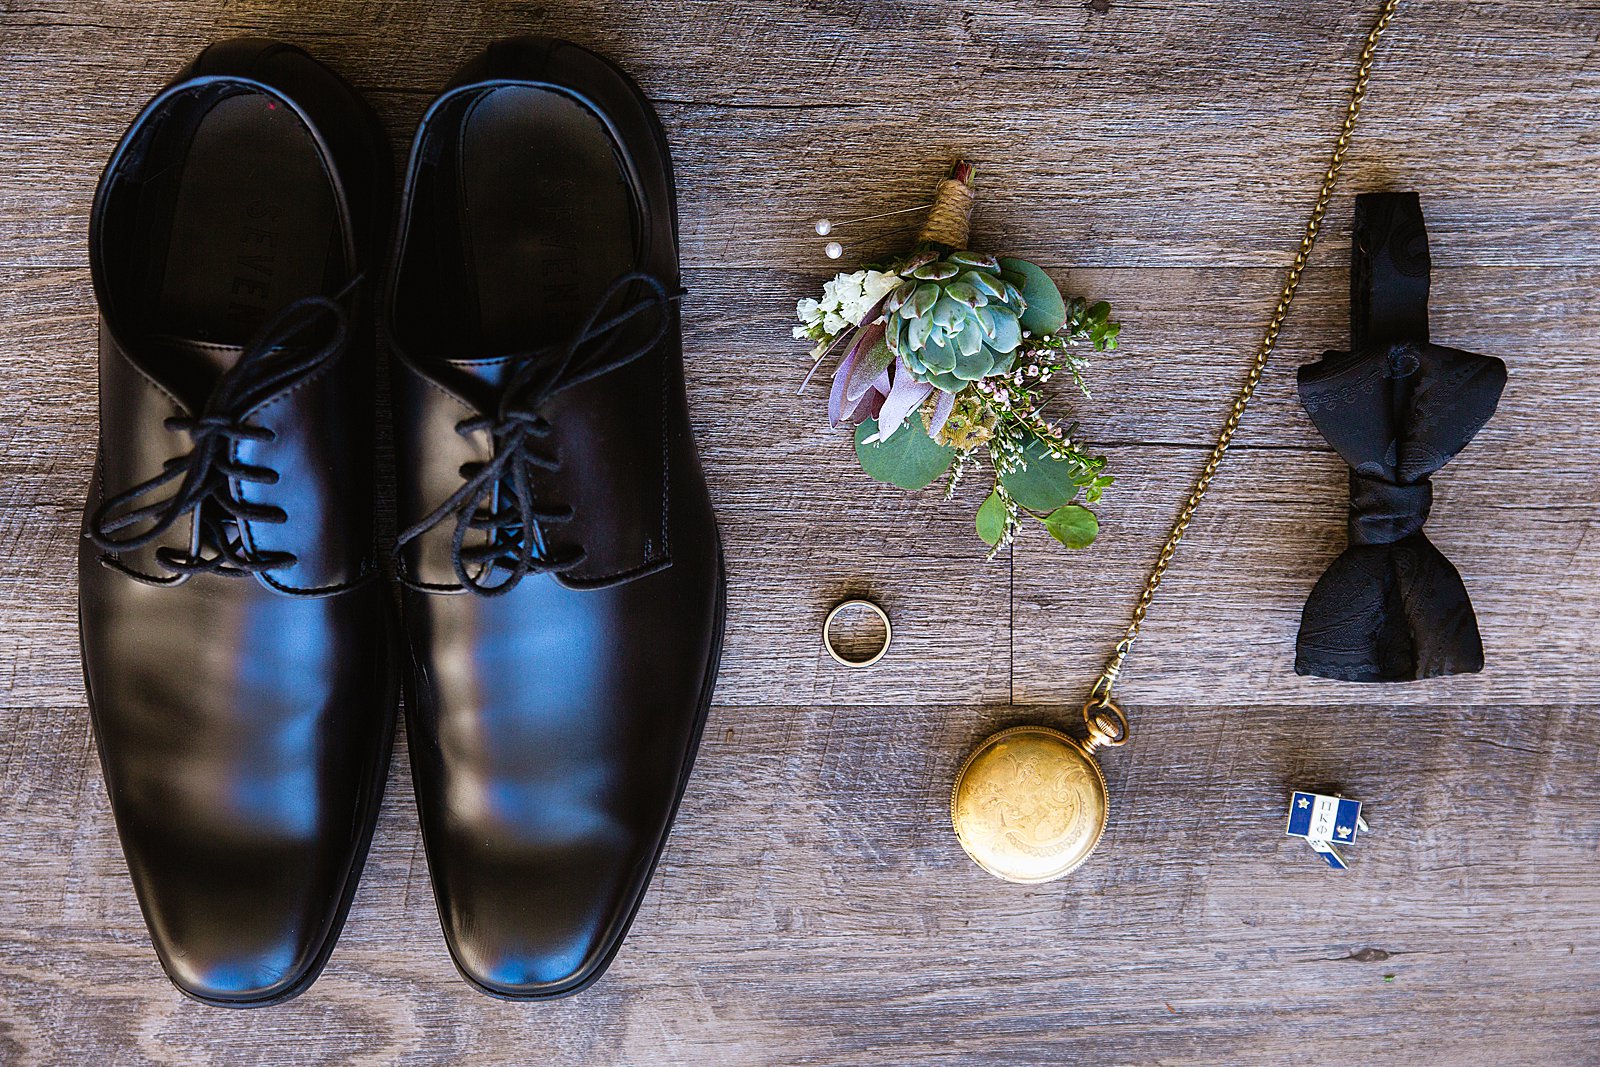 Groom's wedding day details of black bow tie, cuff links, succulent boutonniere, and pocket watch by PMA Photography.